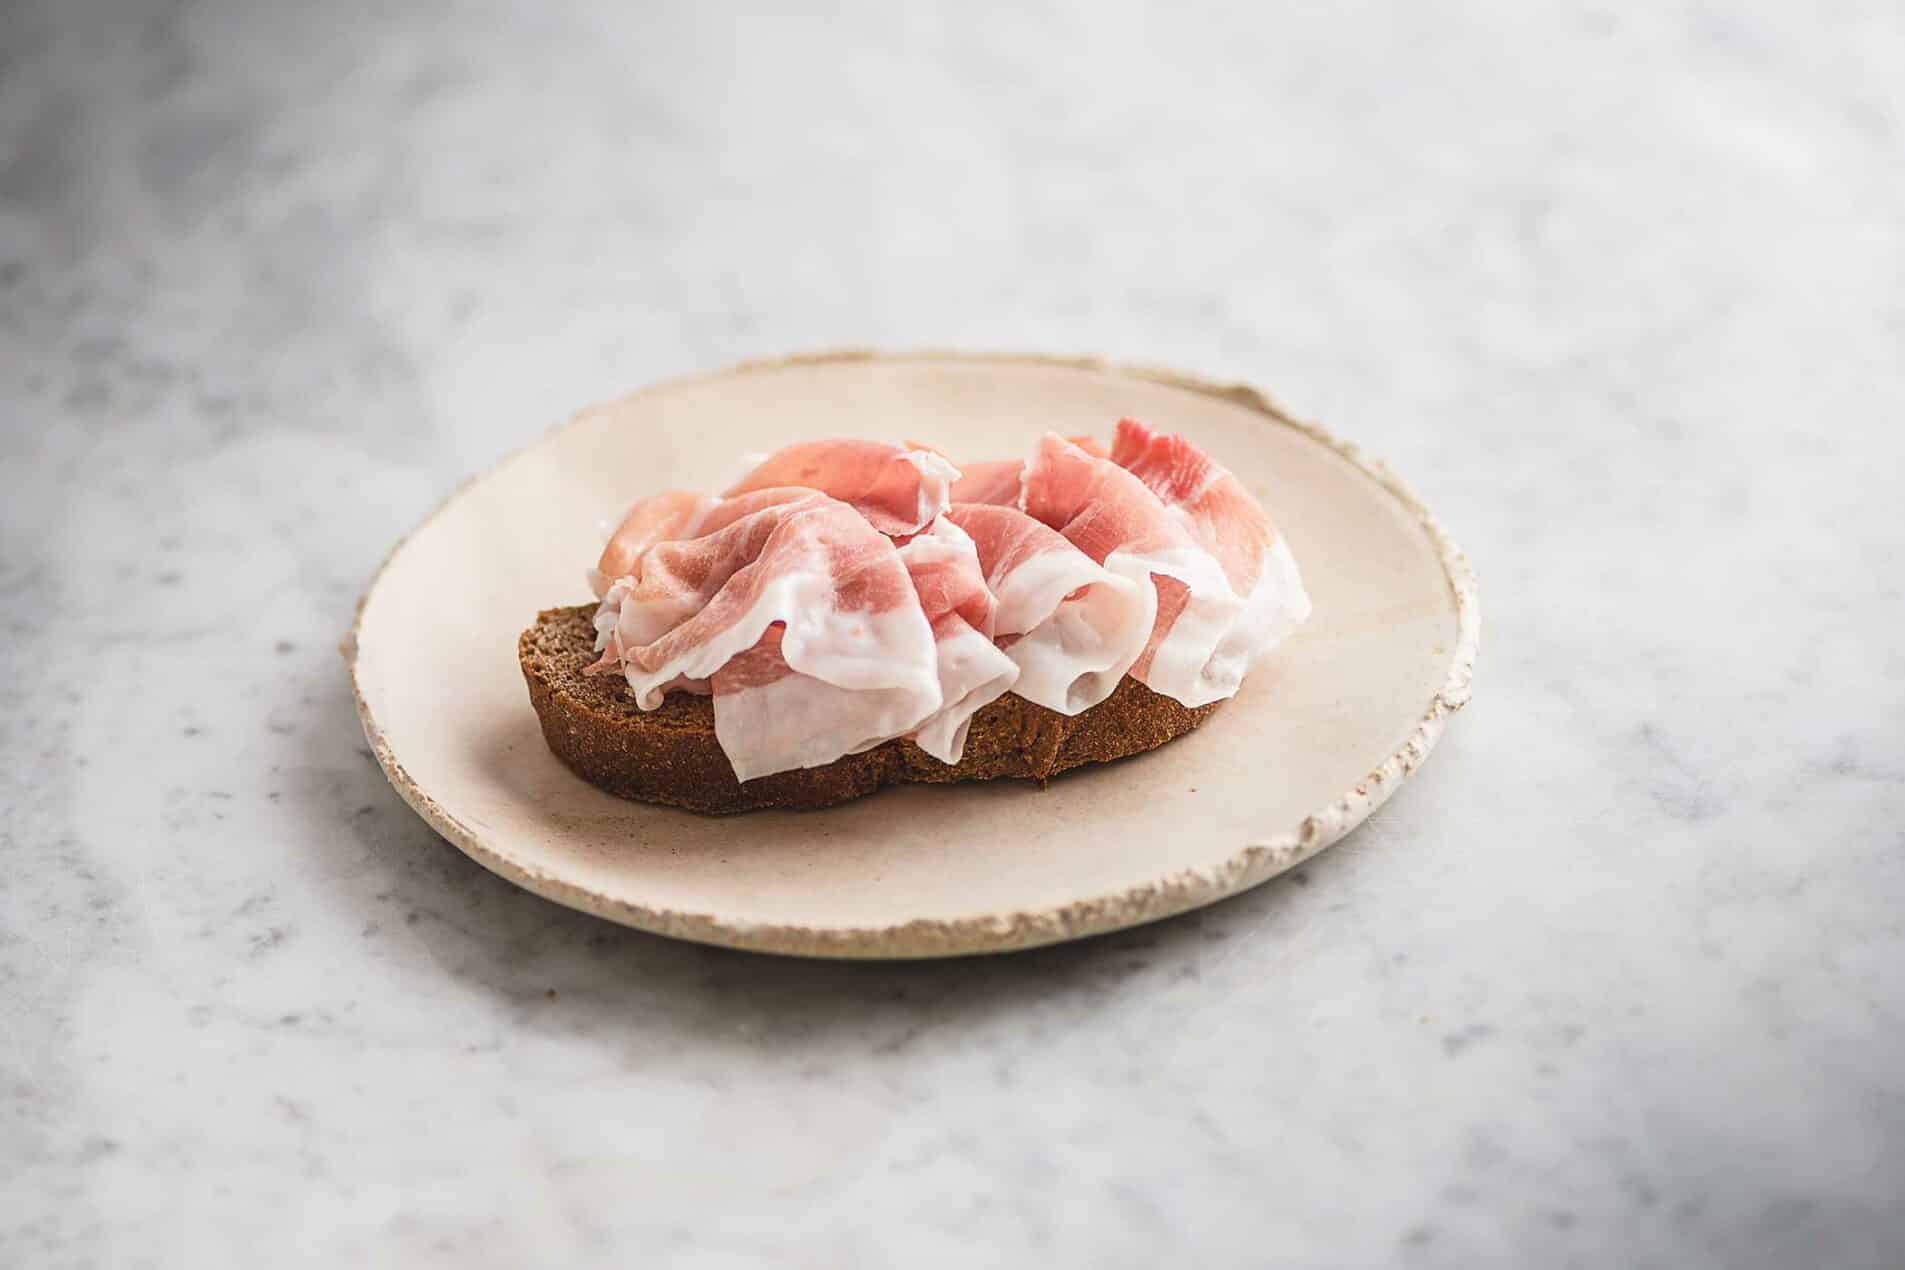 Prosciutto di San Daniele, the product to be enjoyed even while pregnant